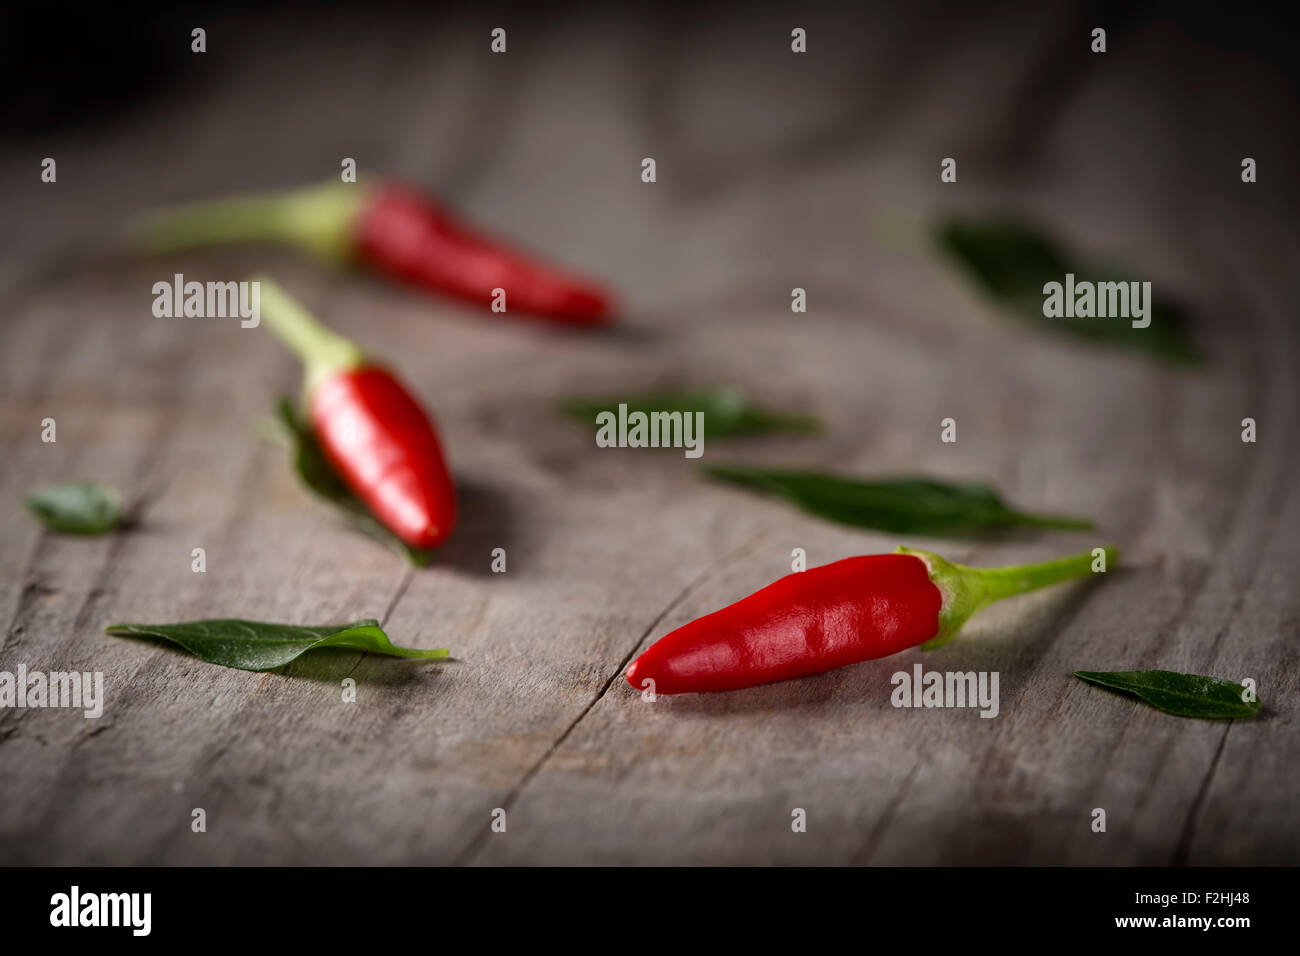 Red hot chili peppers on wood background with leaves Stock Photo